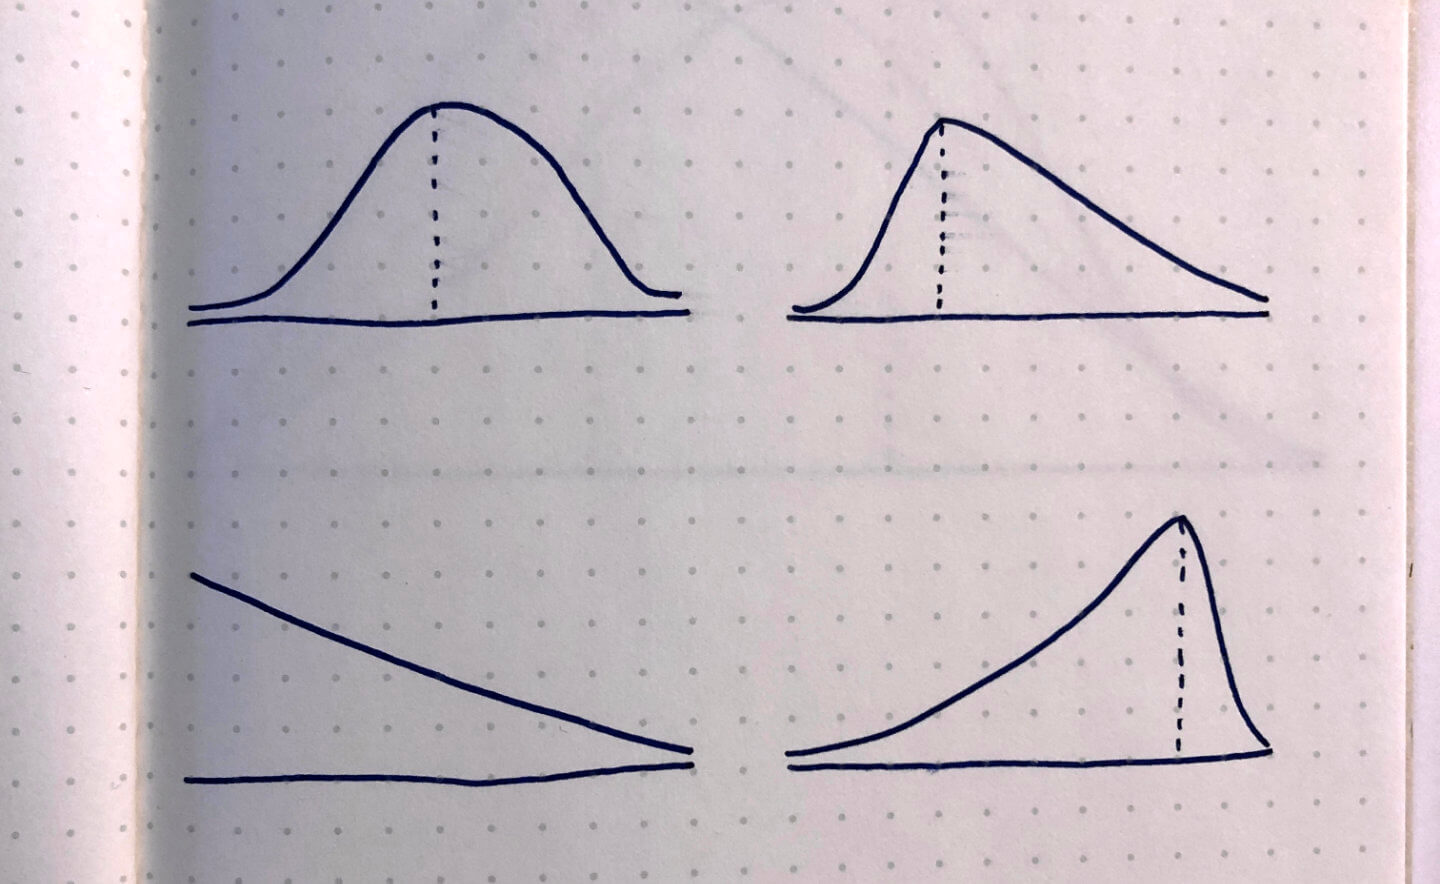 Sketches of Hill Charts with variable slopes